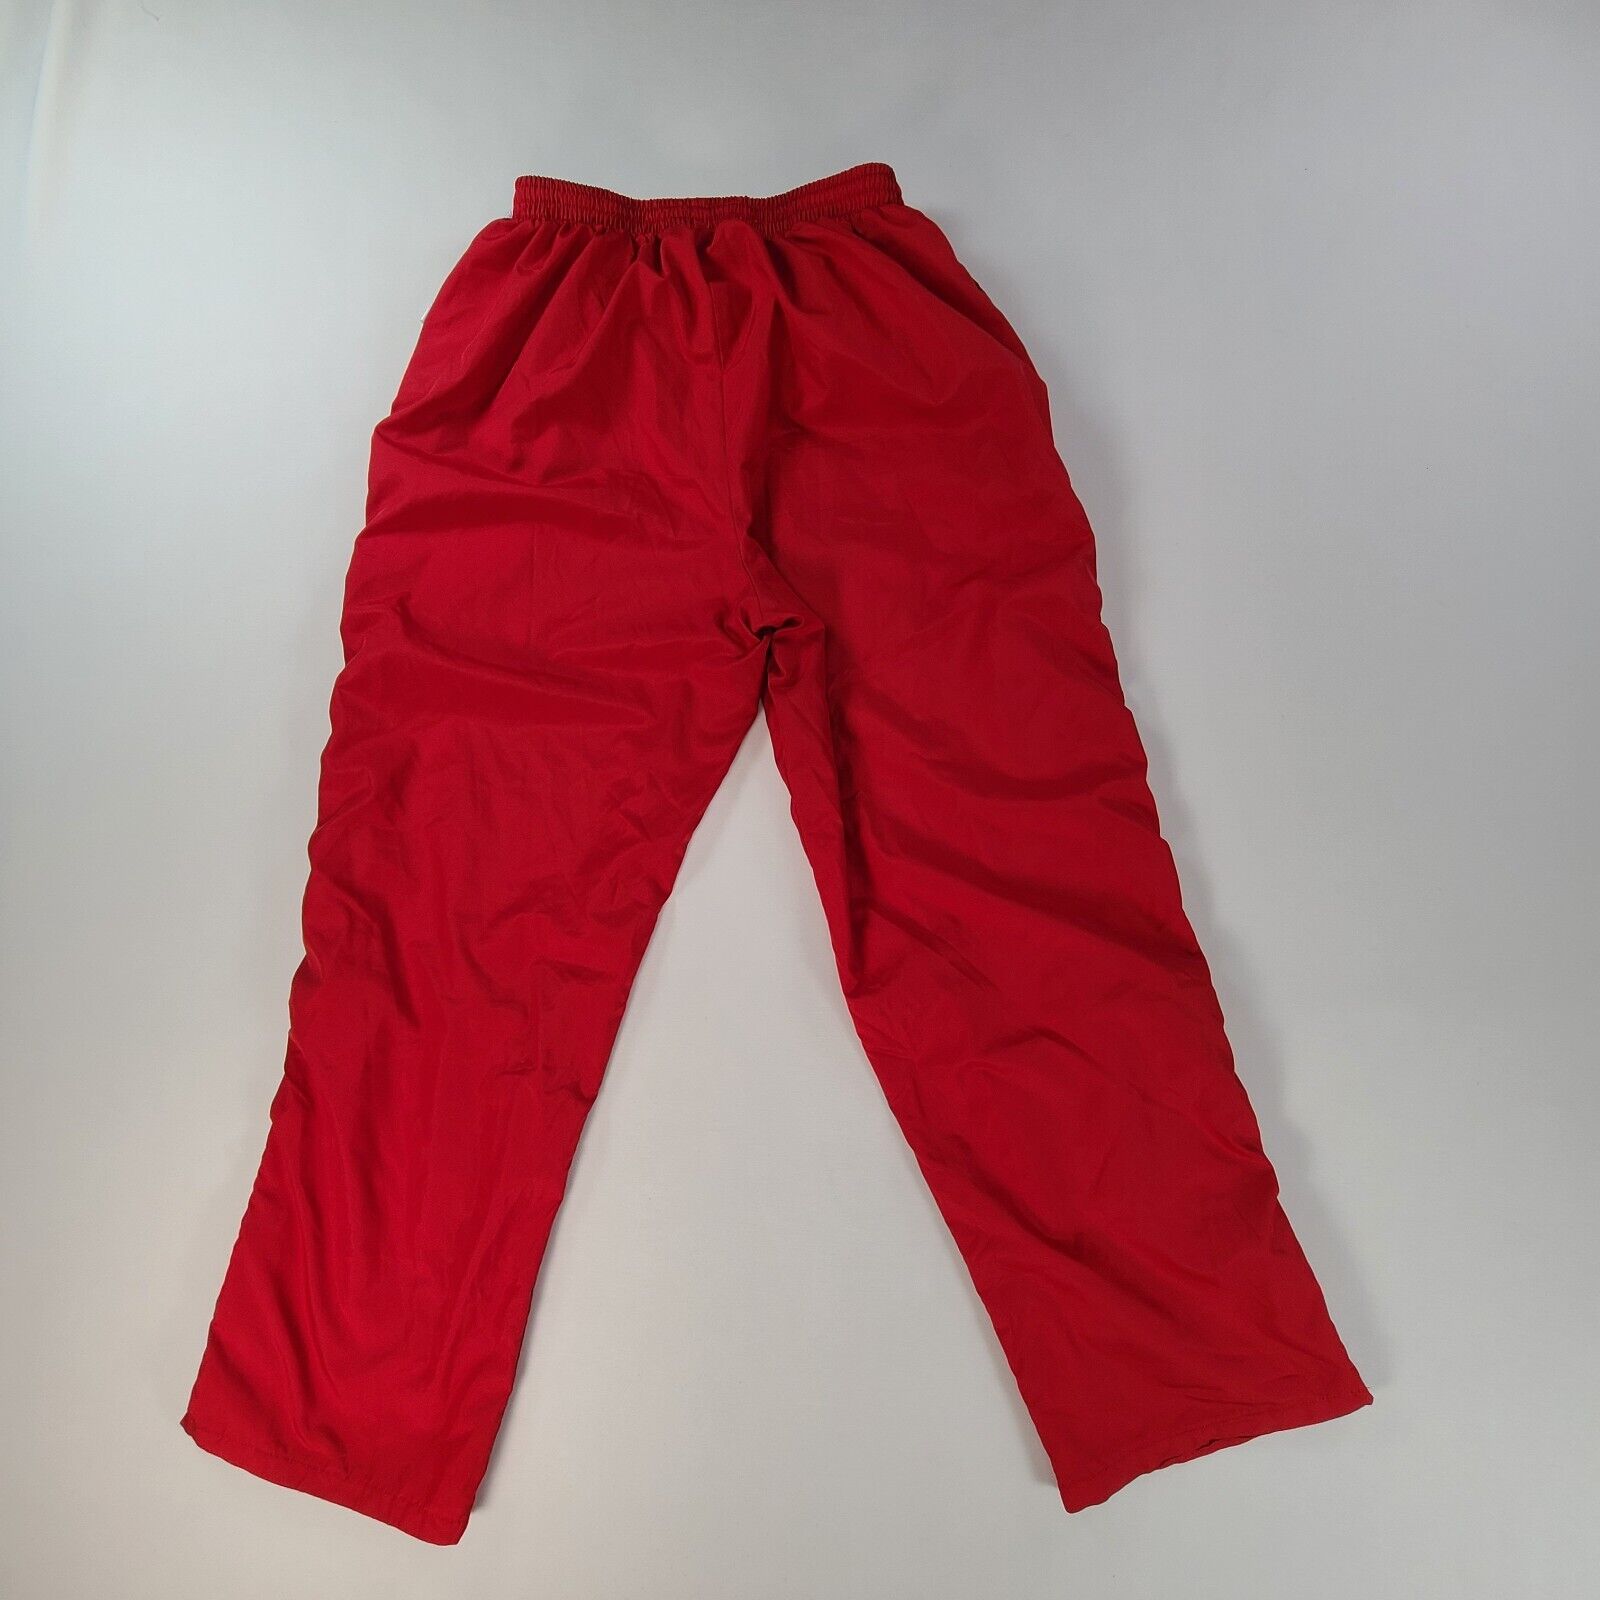 High Five Sportswear Mens Pants Adult Large Red Track Pants Training Ankle Zip